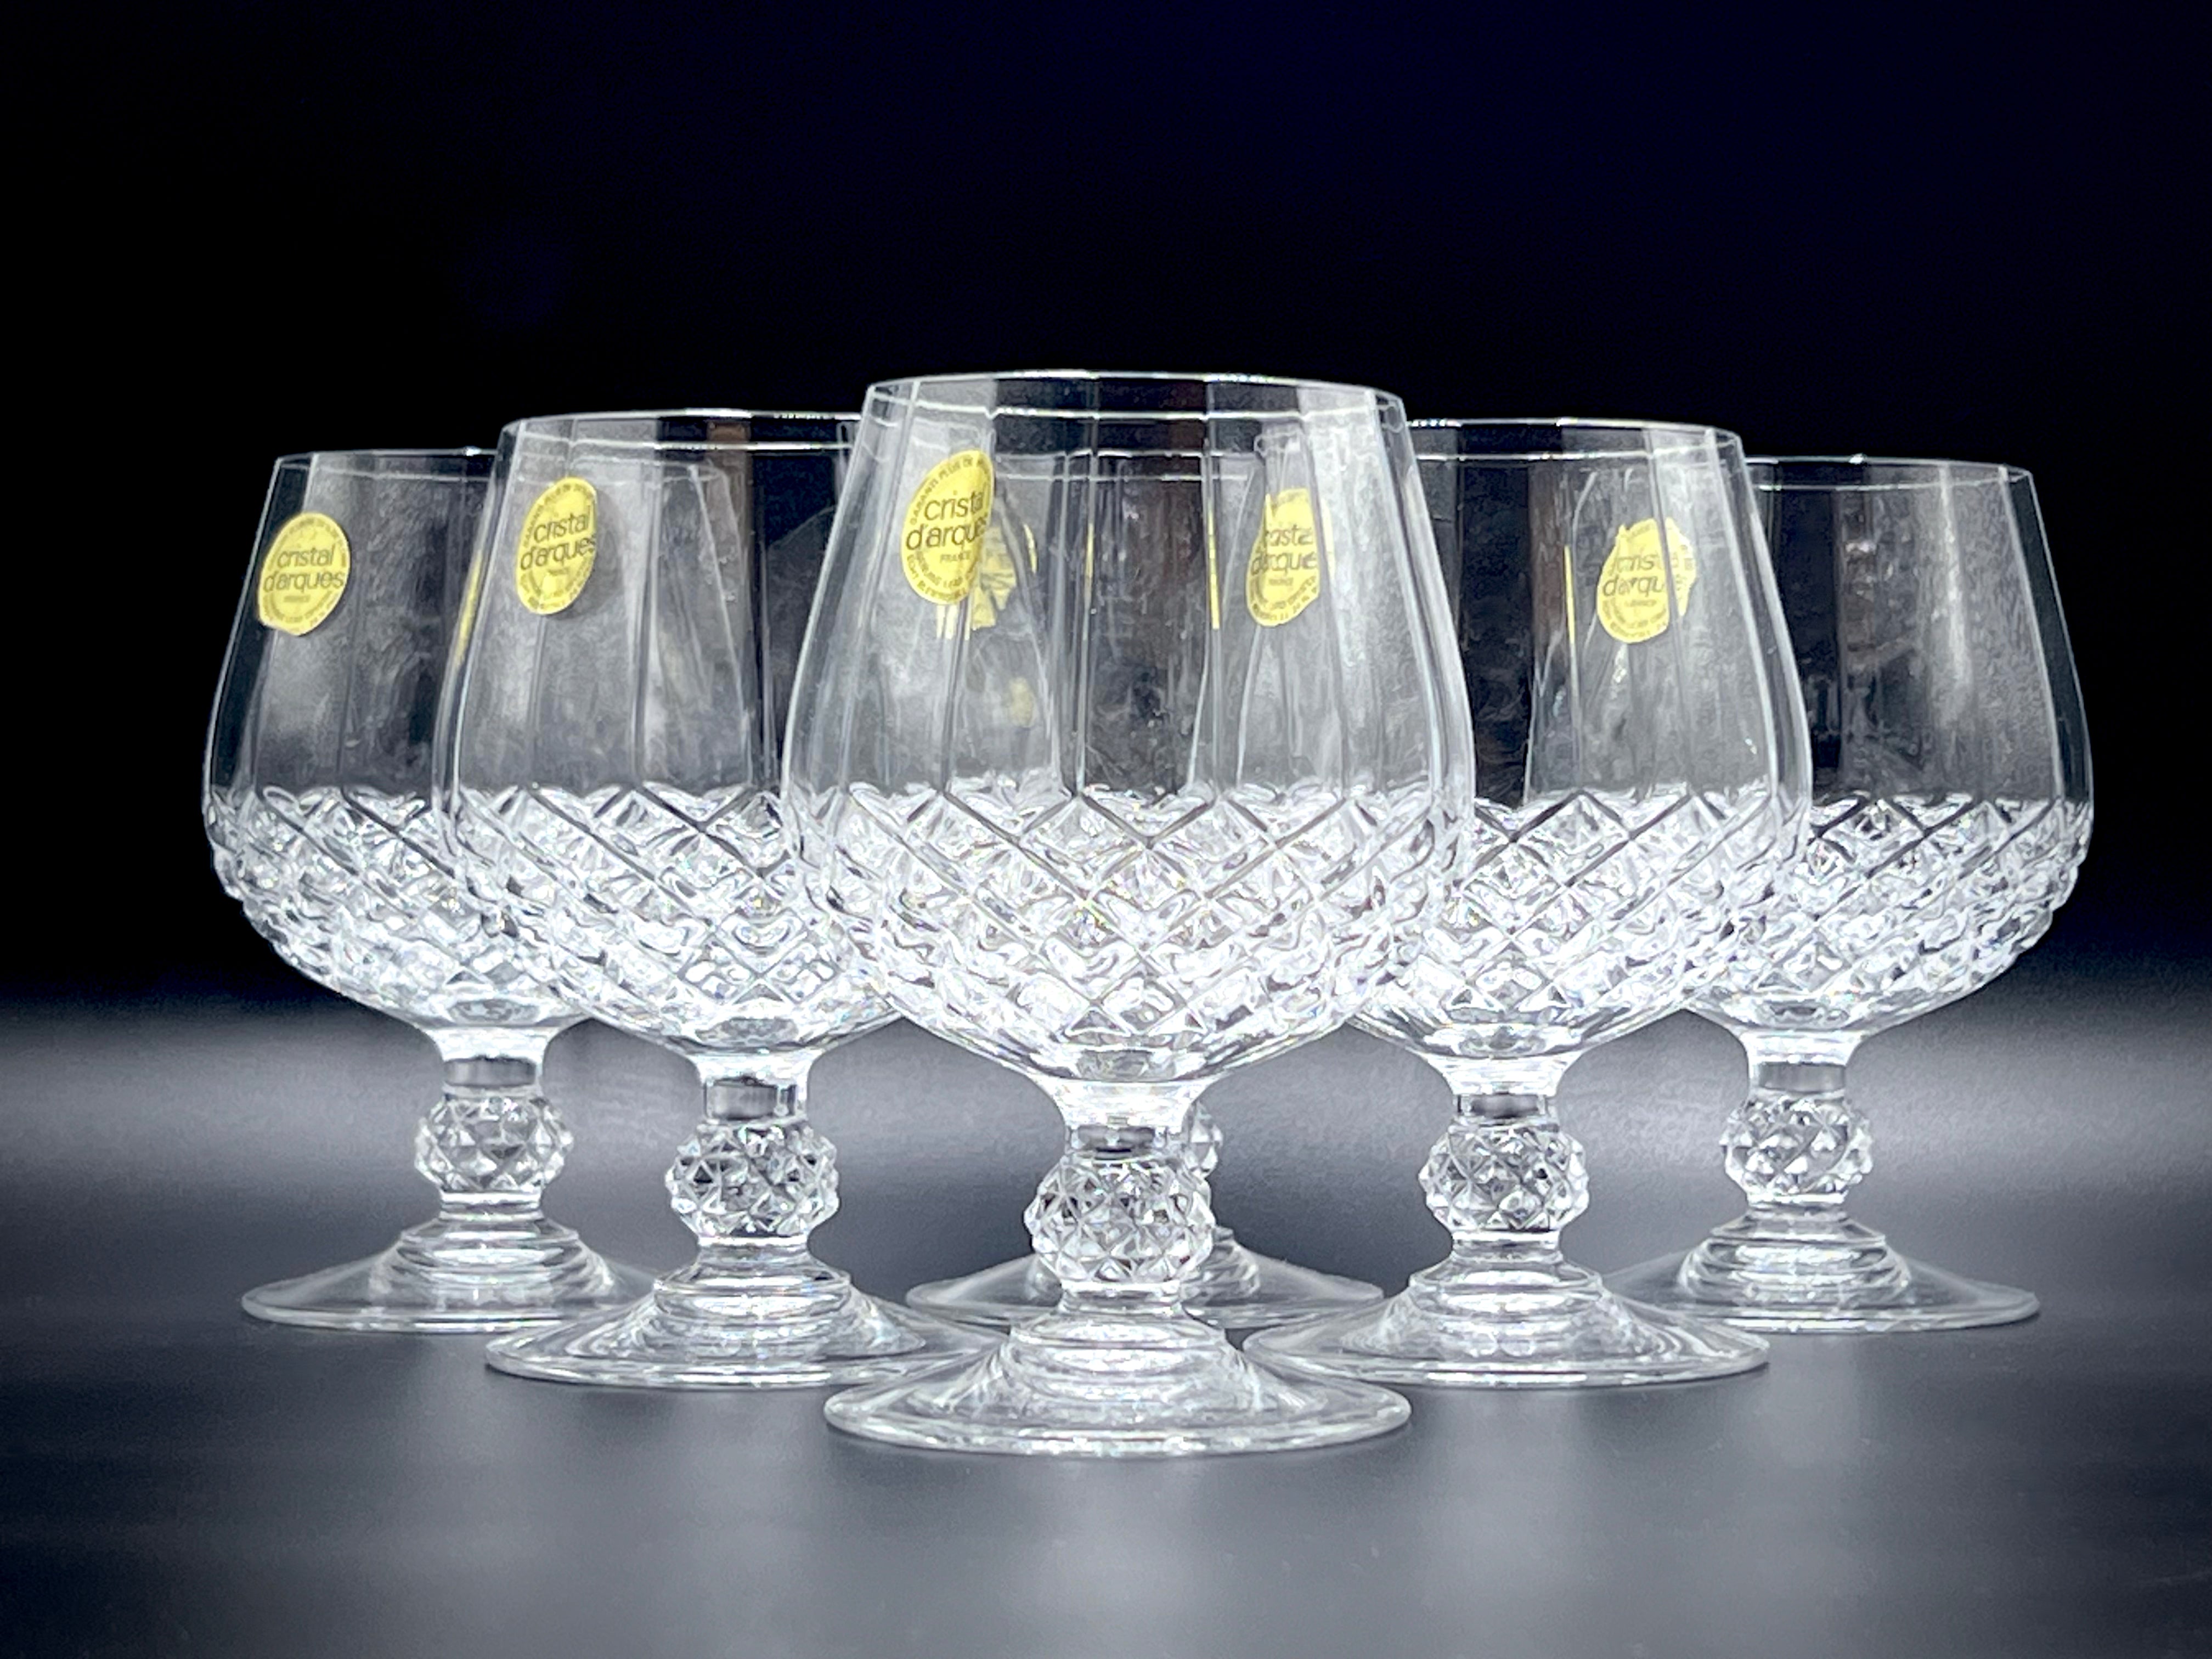 Crystal Brandy Snifters, Vintage D'arques Brandy Glasses, Cognac Glasses, Brandy  Snifters in the Longchamp Pattern, Gift Idea, Gift for Mom -  Canada